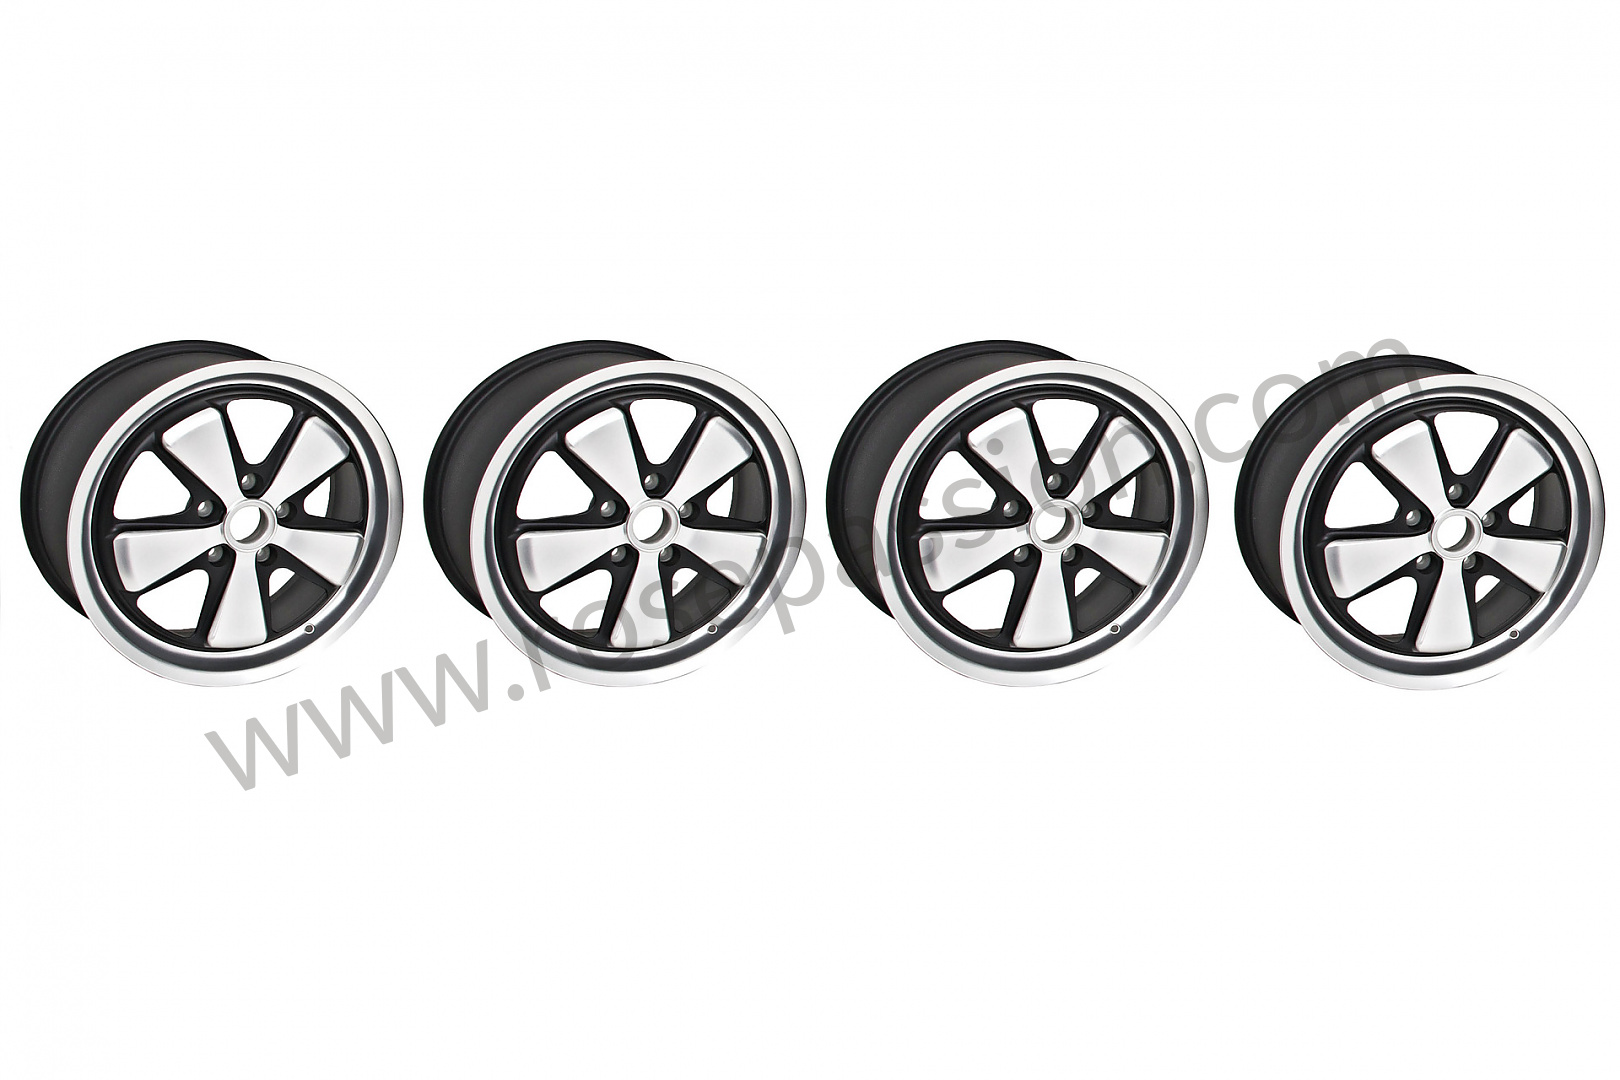 P198445 - Fuchs wheels, 18 inch, set of 4 wheels 8 and 10 inch (polished  and black finish) - ET52 FRONT + ET65 REAR INCHES for Porsche 996 / 911  Carrera / 1999 / 996 carrera 4 / Cabrio / Automatic gearbox